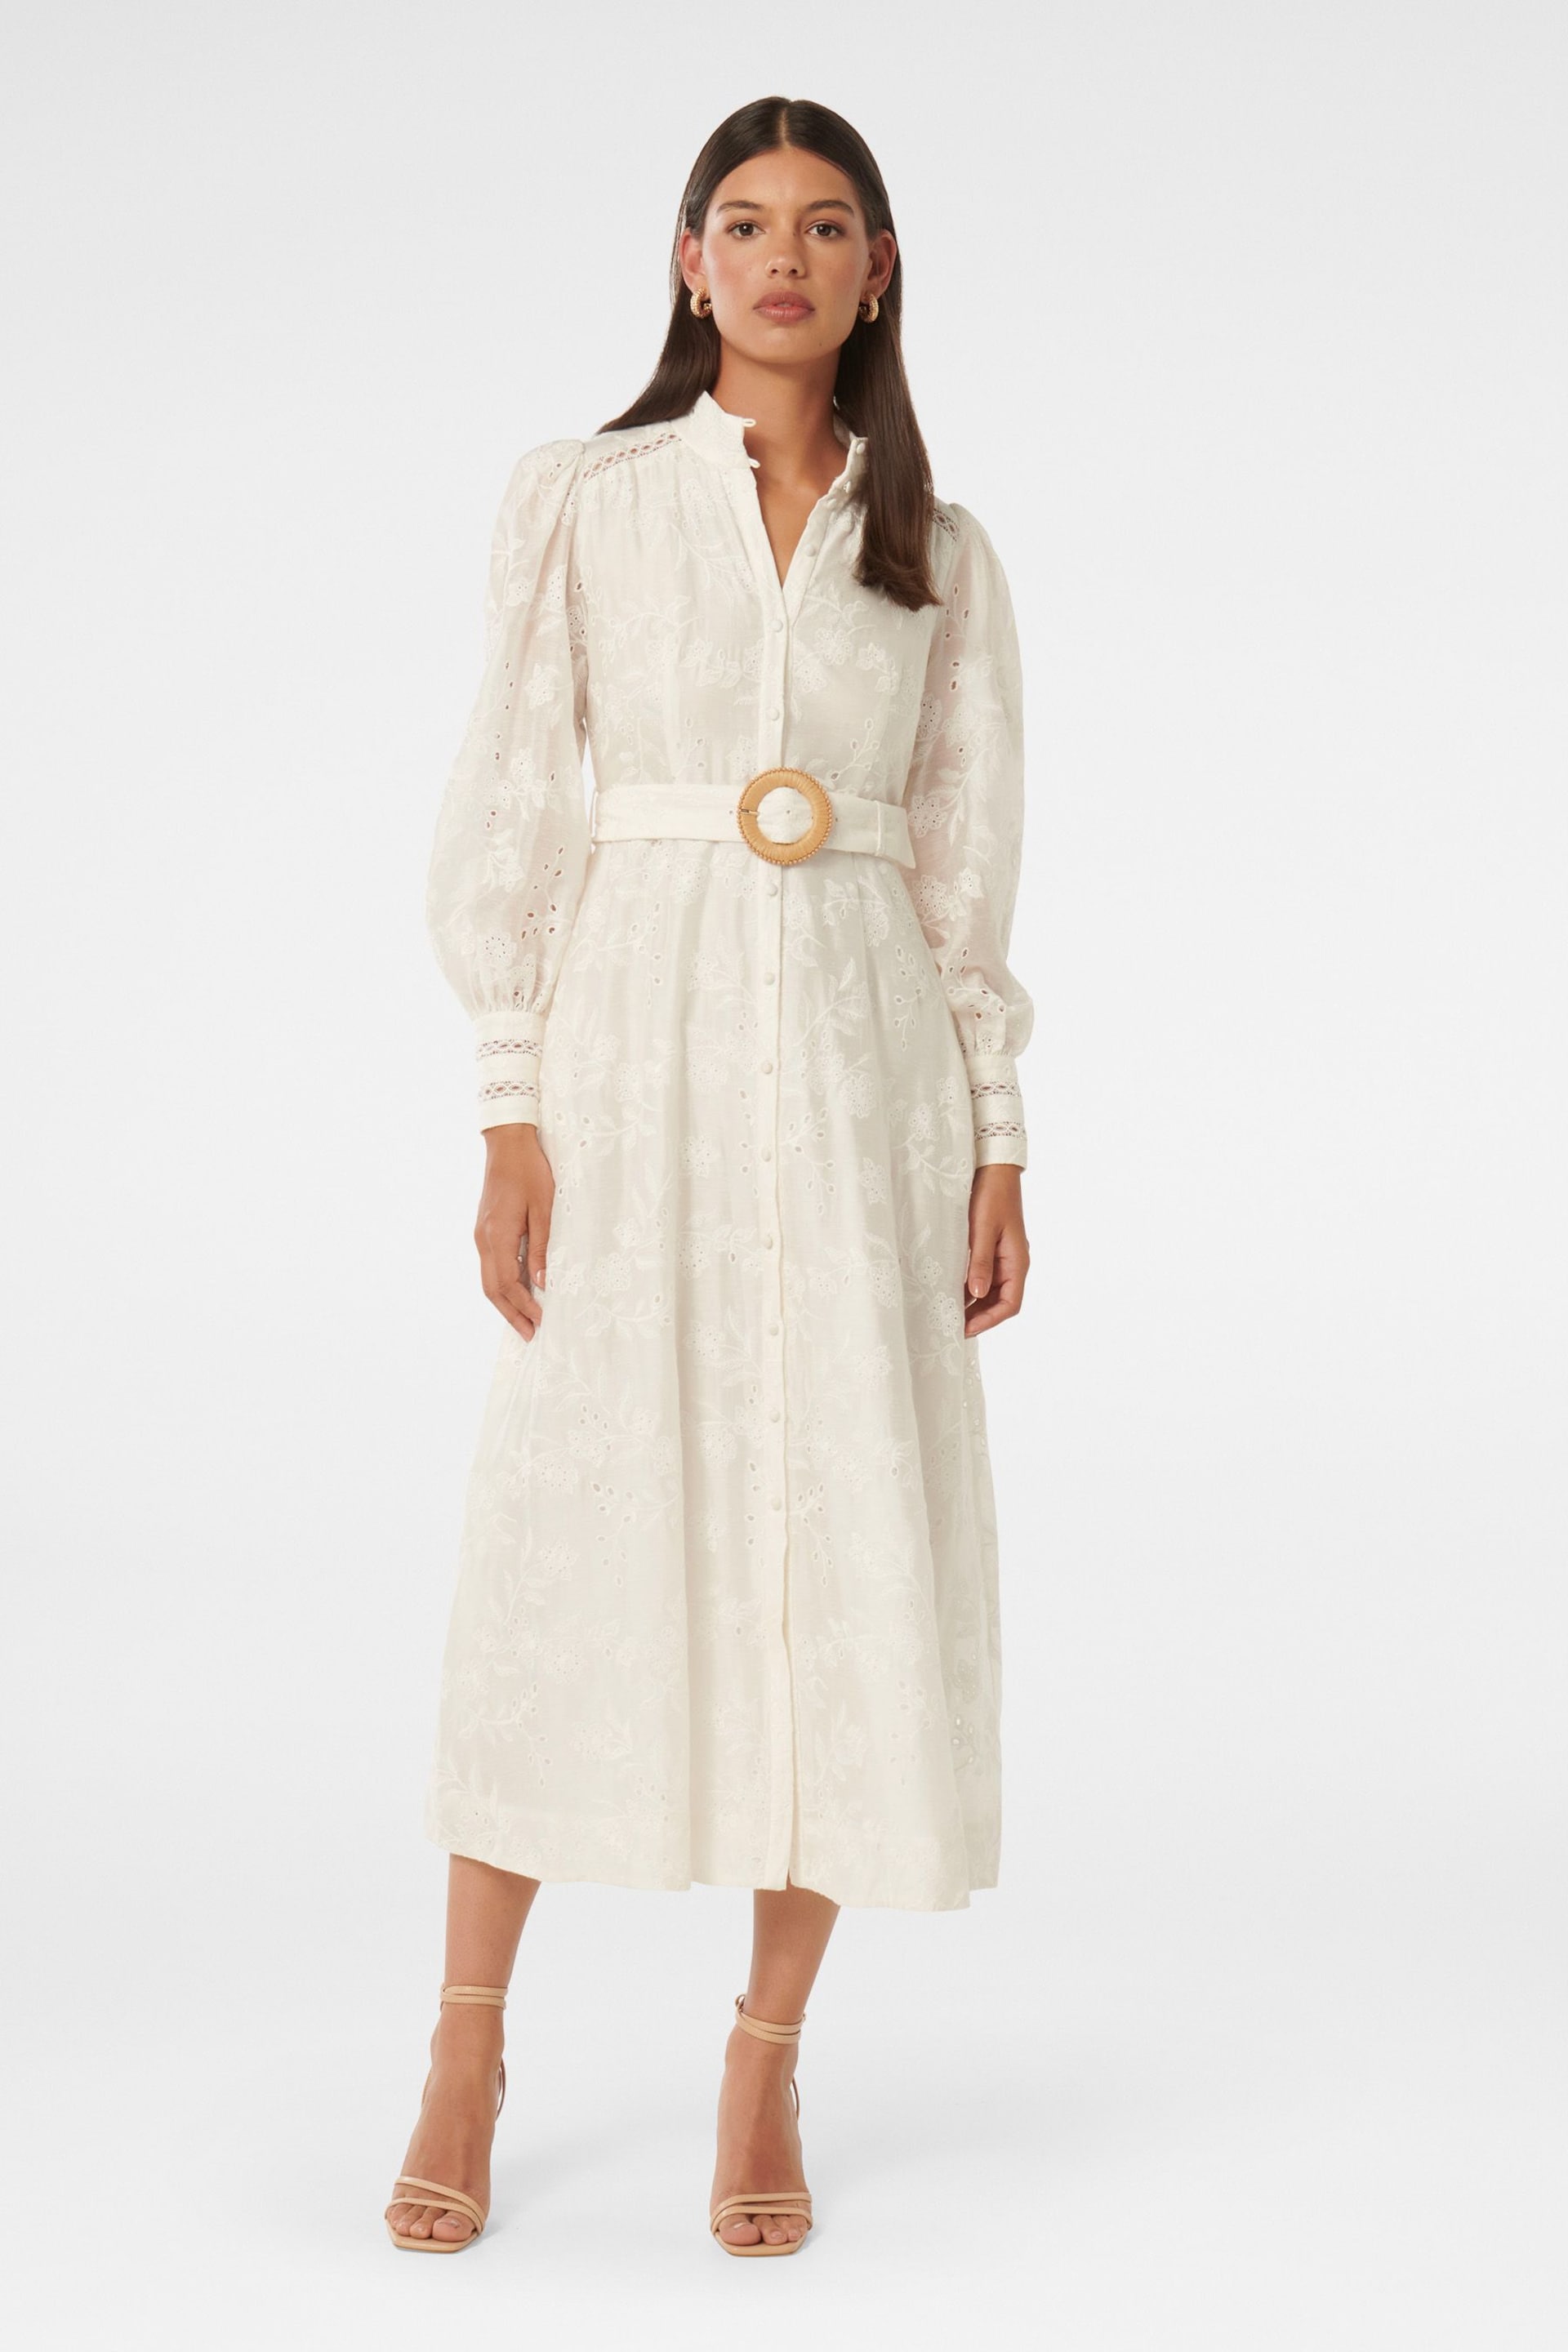 Forever New White Autumn Embroidered Midi Dress contains Linen - Image 1 of 4